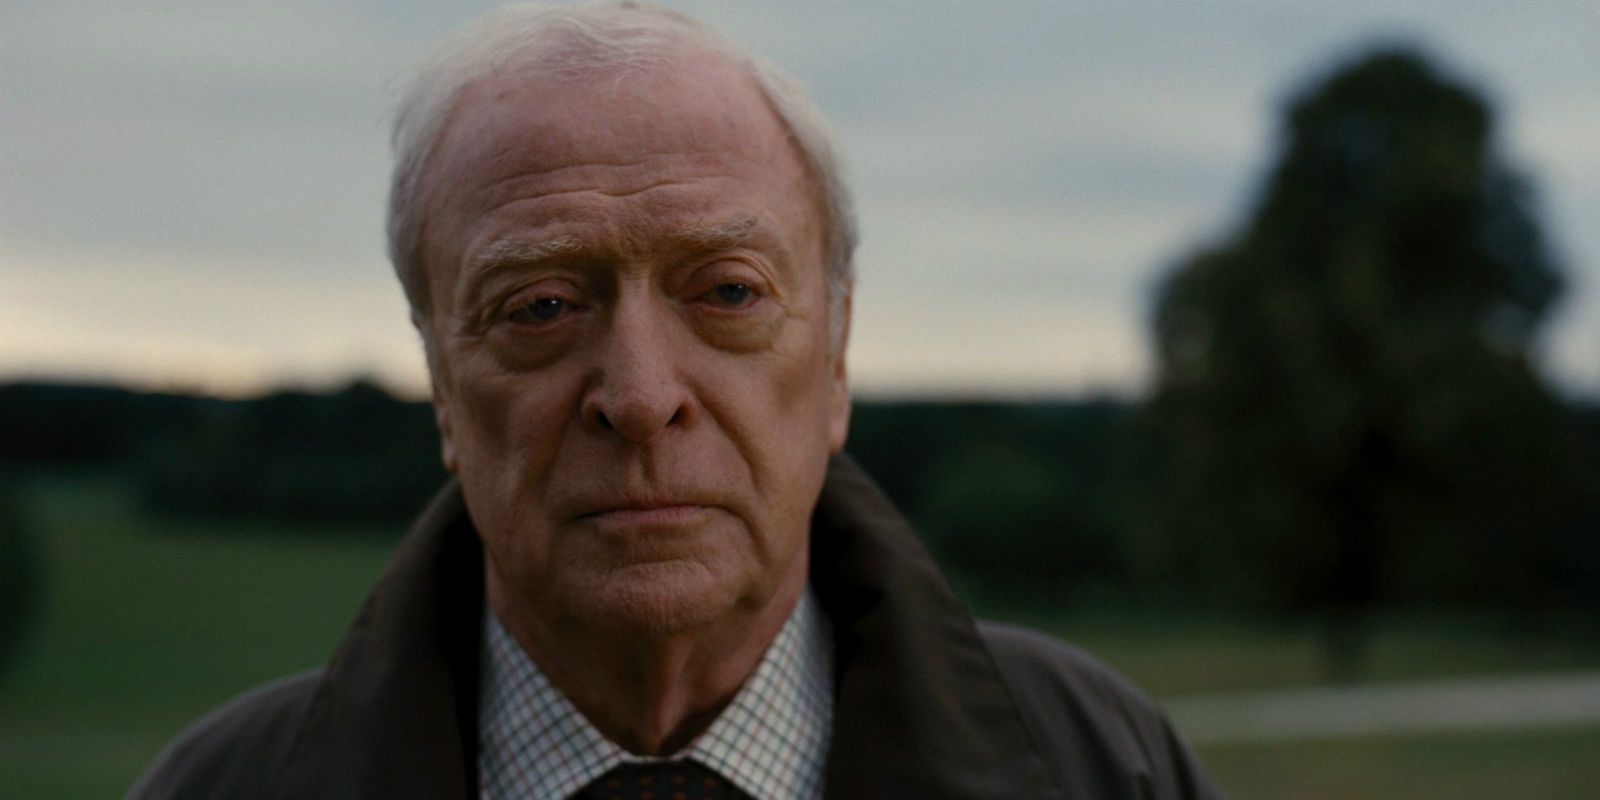 Alfred looking upset in The Dark Knight Rises